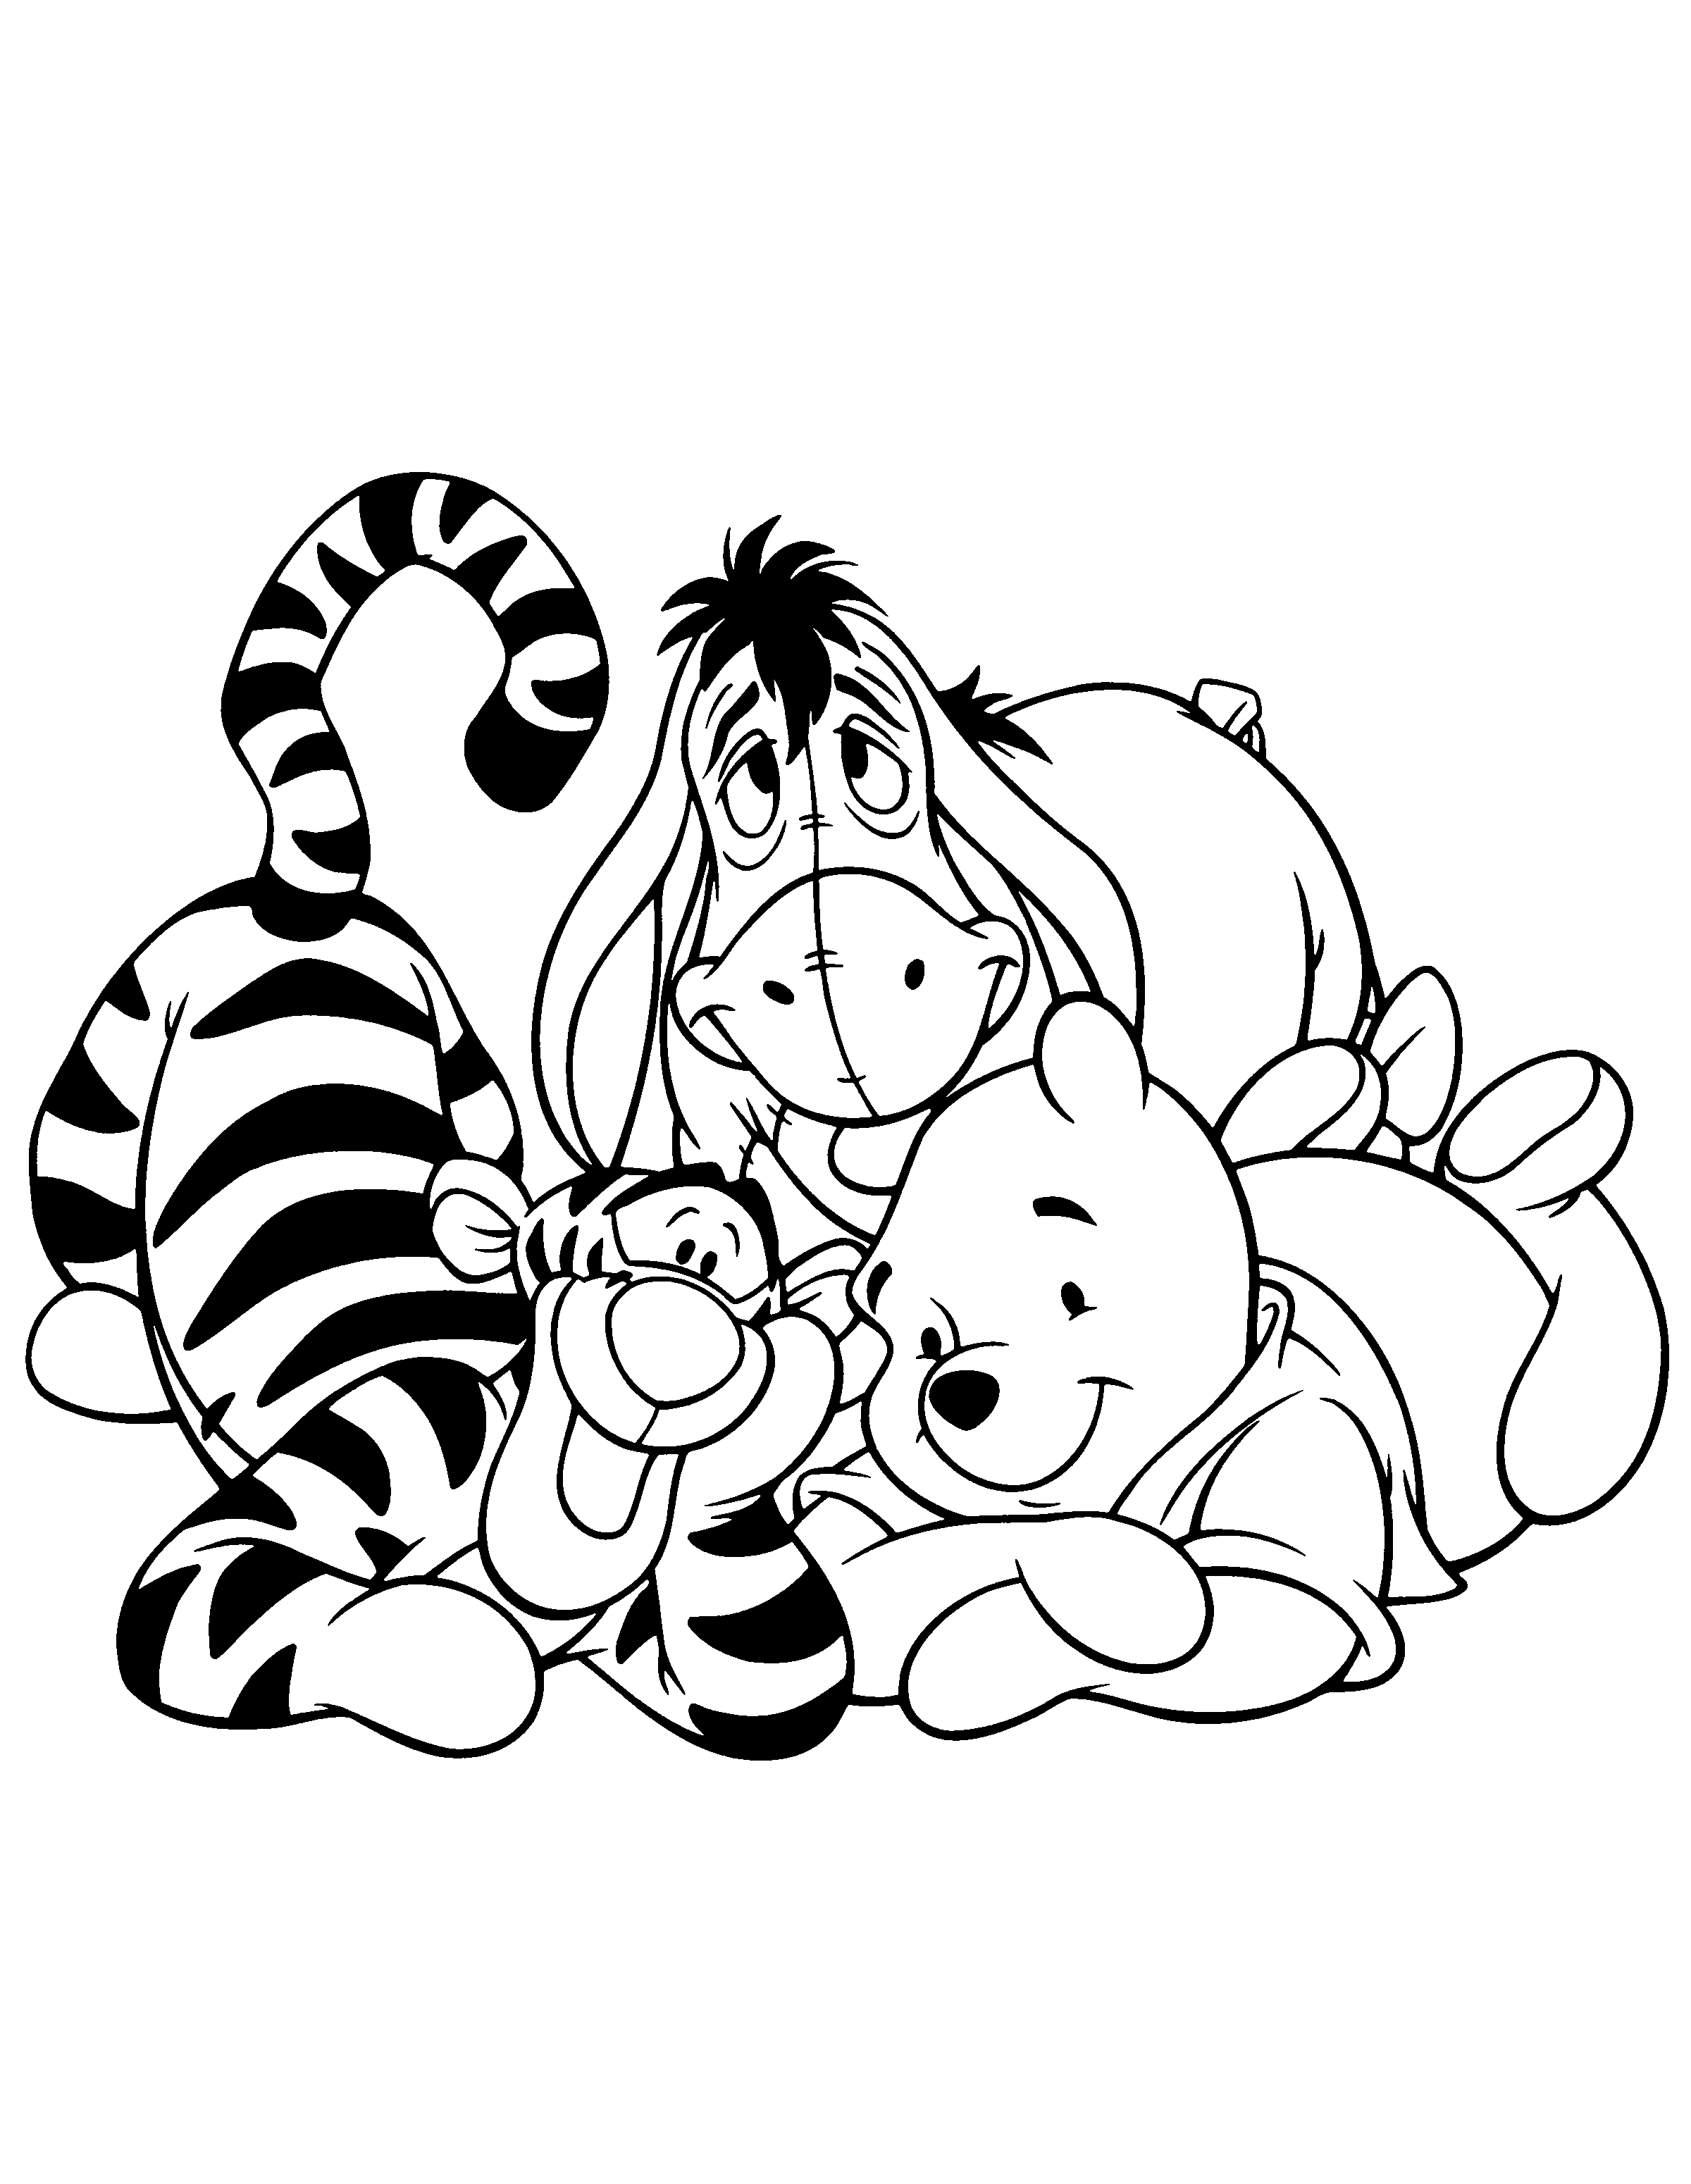 winnie-the-pooh-coloring-pages-20-coloring-kids